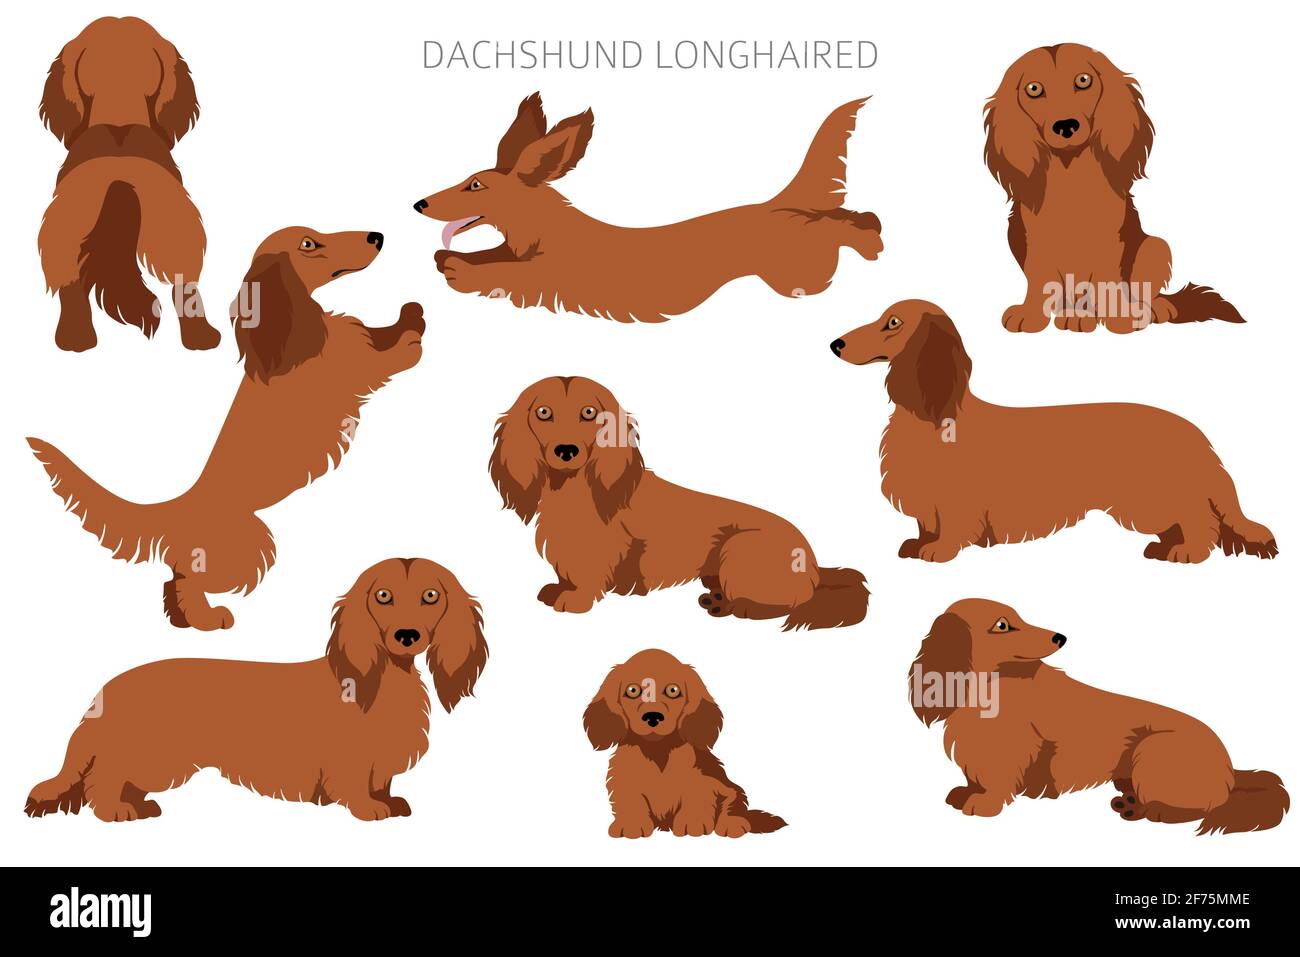 Dachshund long haired clipart. Different poses, coat colors set.  Vector illustration Stock Vector